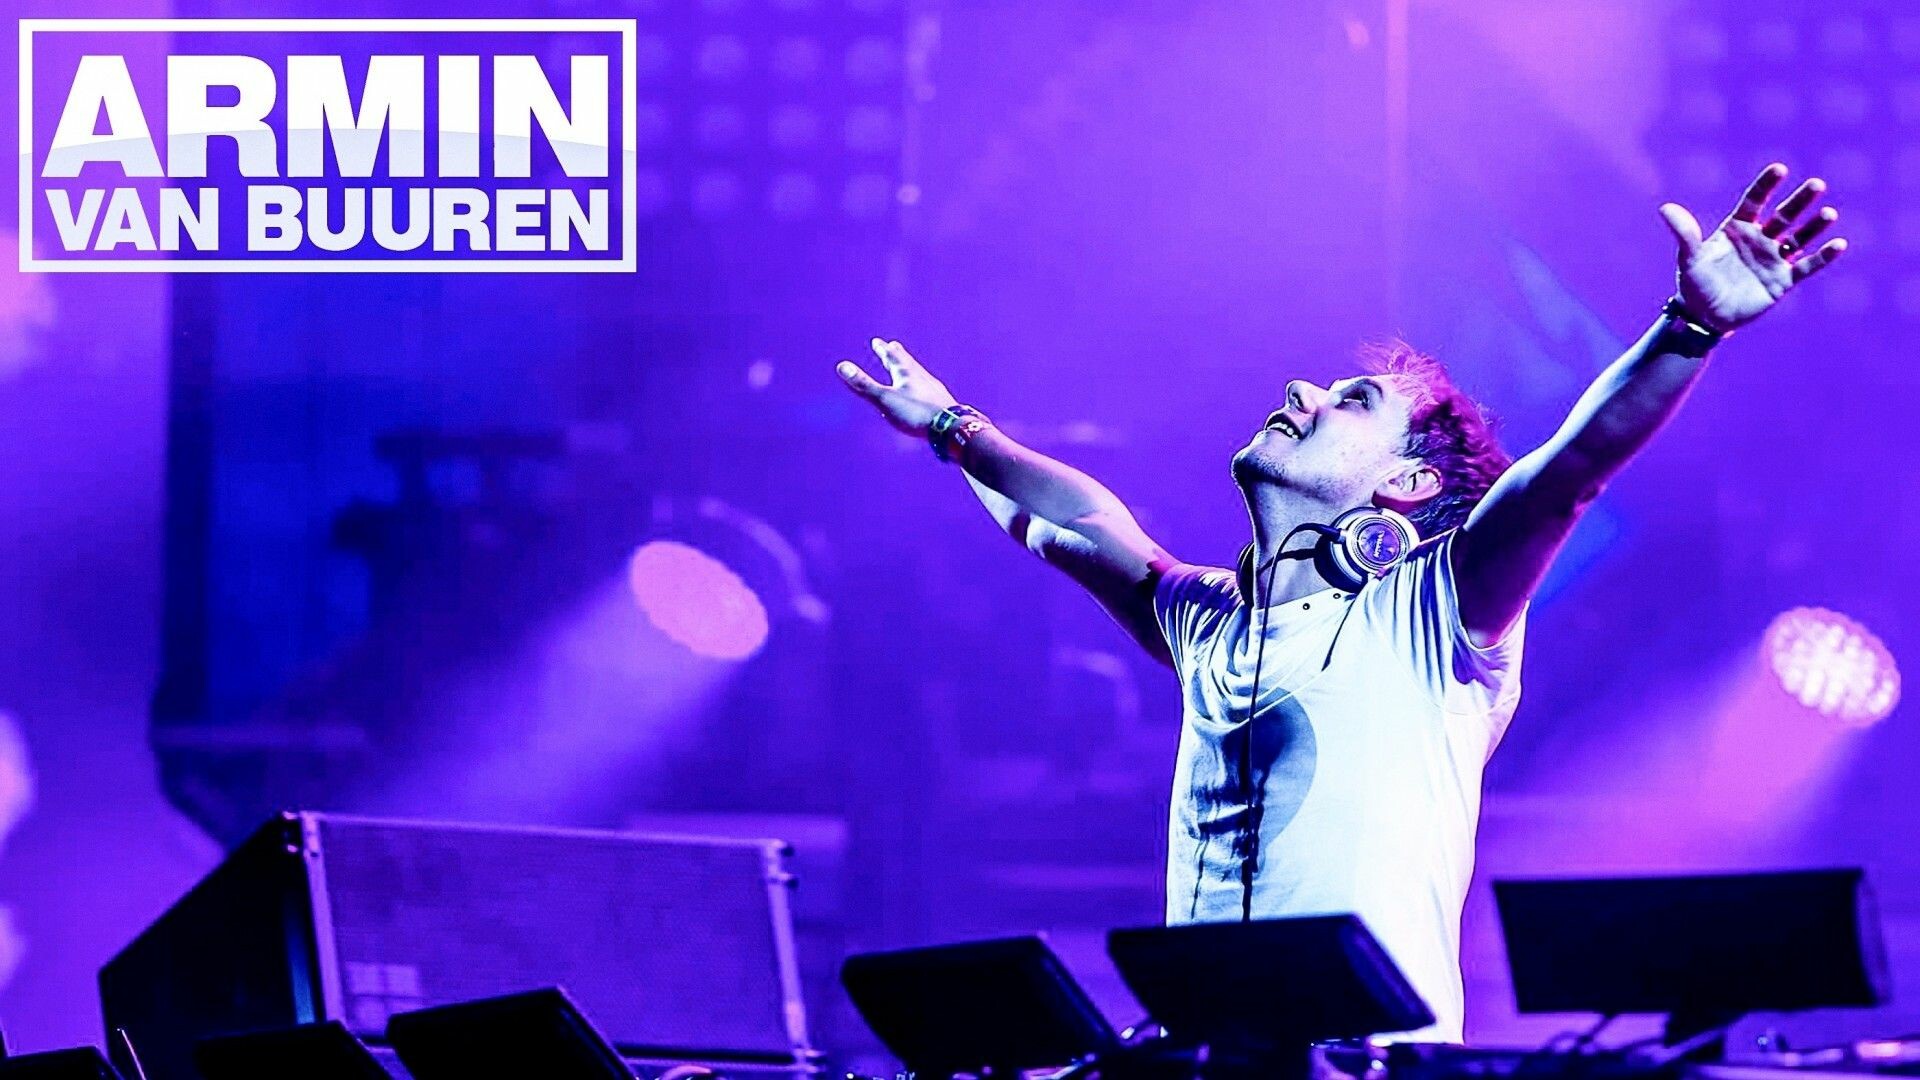 Armin Van Buuren: A fourth album, Transparence, was released in 2002. 1920x1080 Full HD Wallpaper.